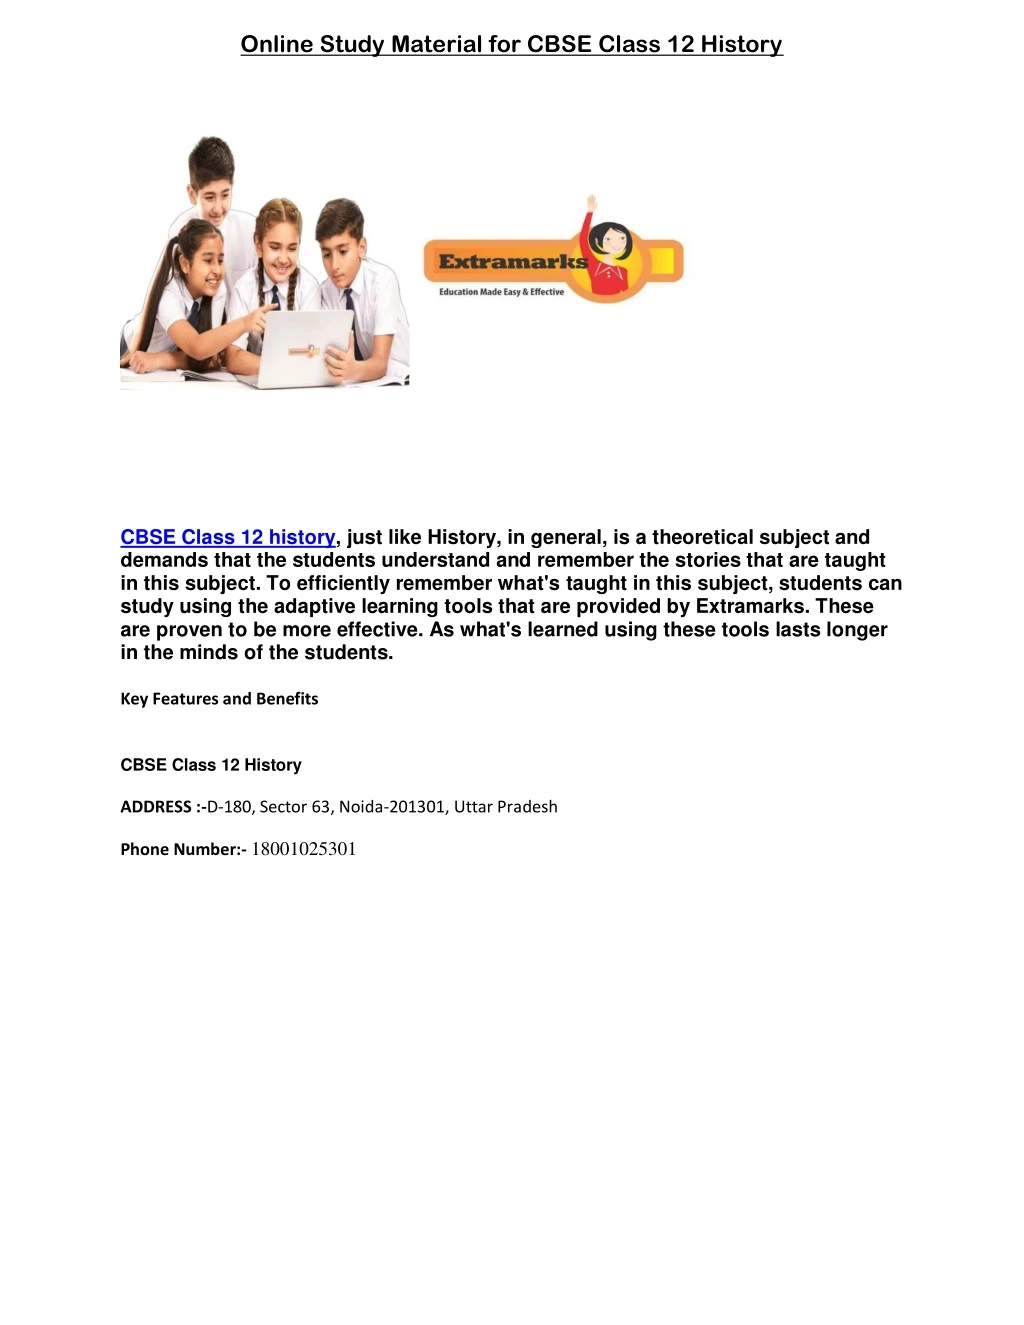 online study material for cbse class 12 history